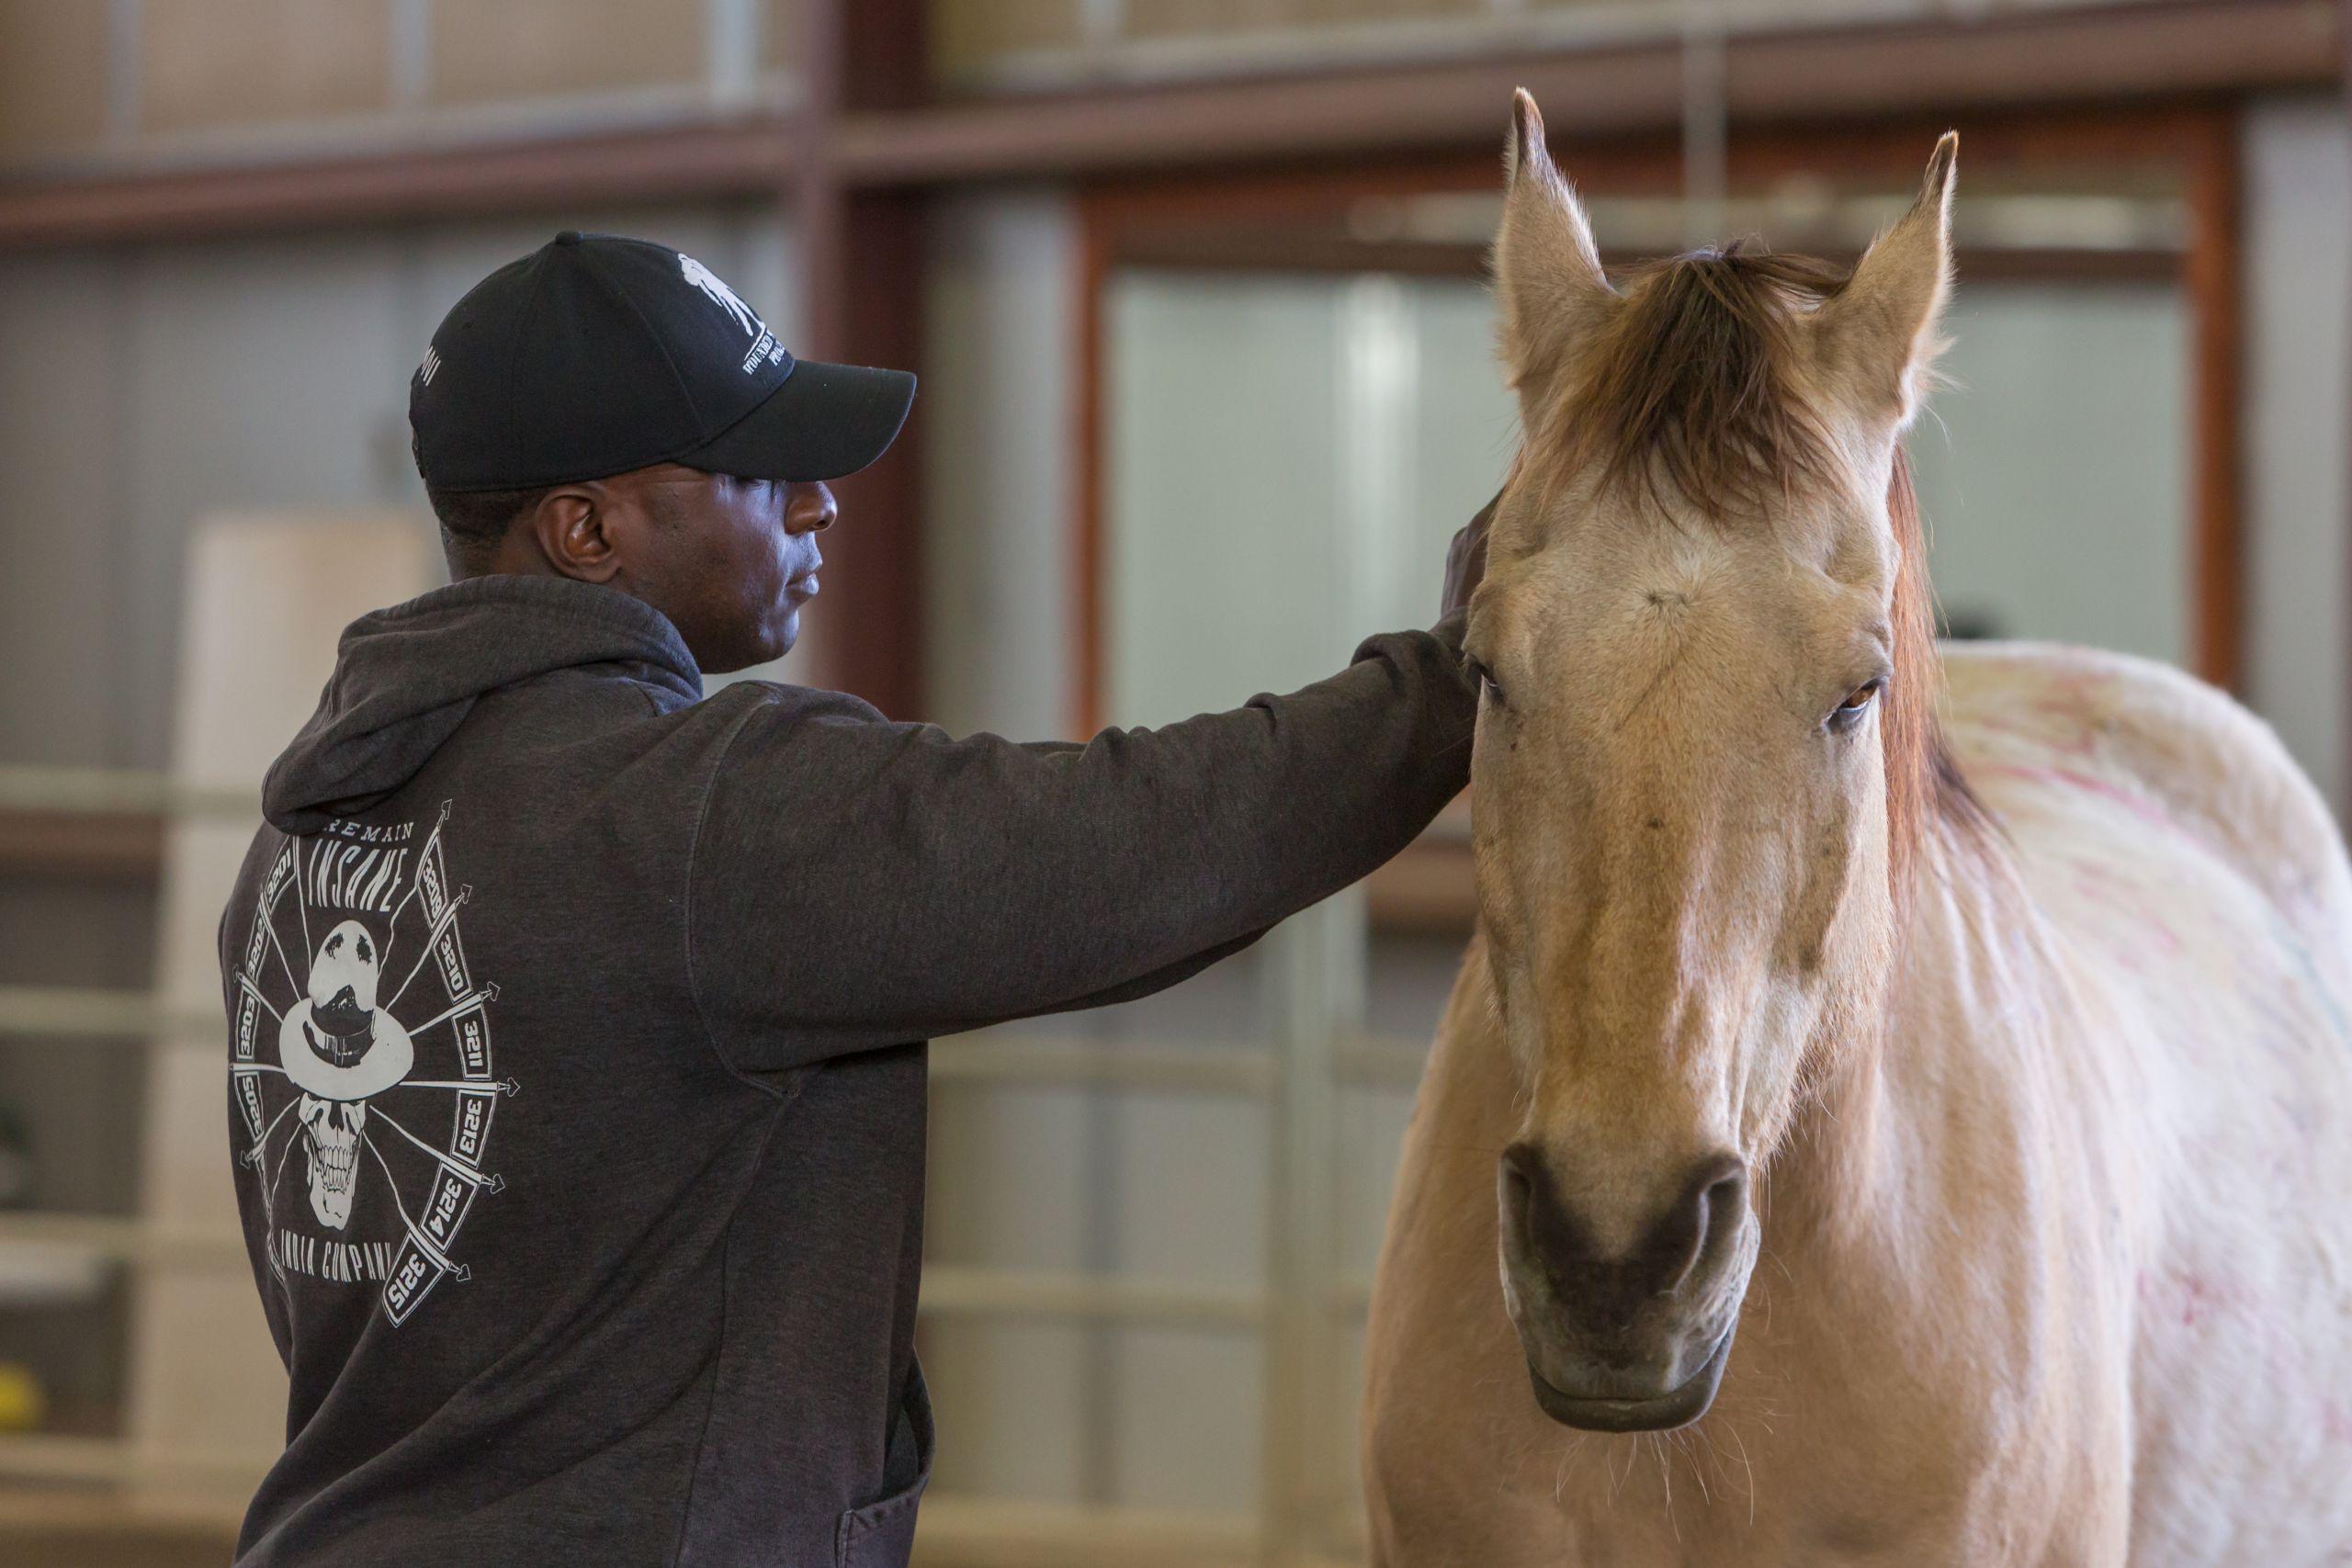 A man strokes a horse's neck during an Equine Assisted Learning session at the National Ability Center.